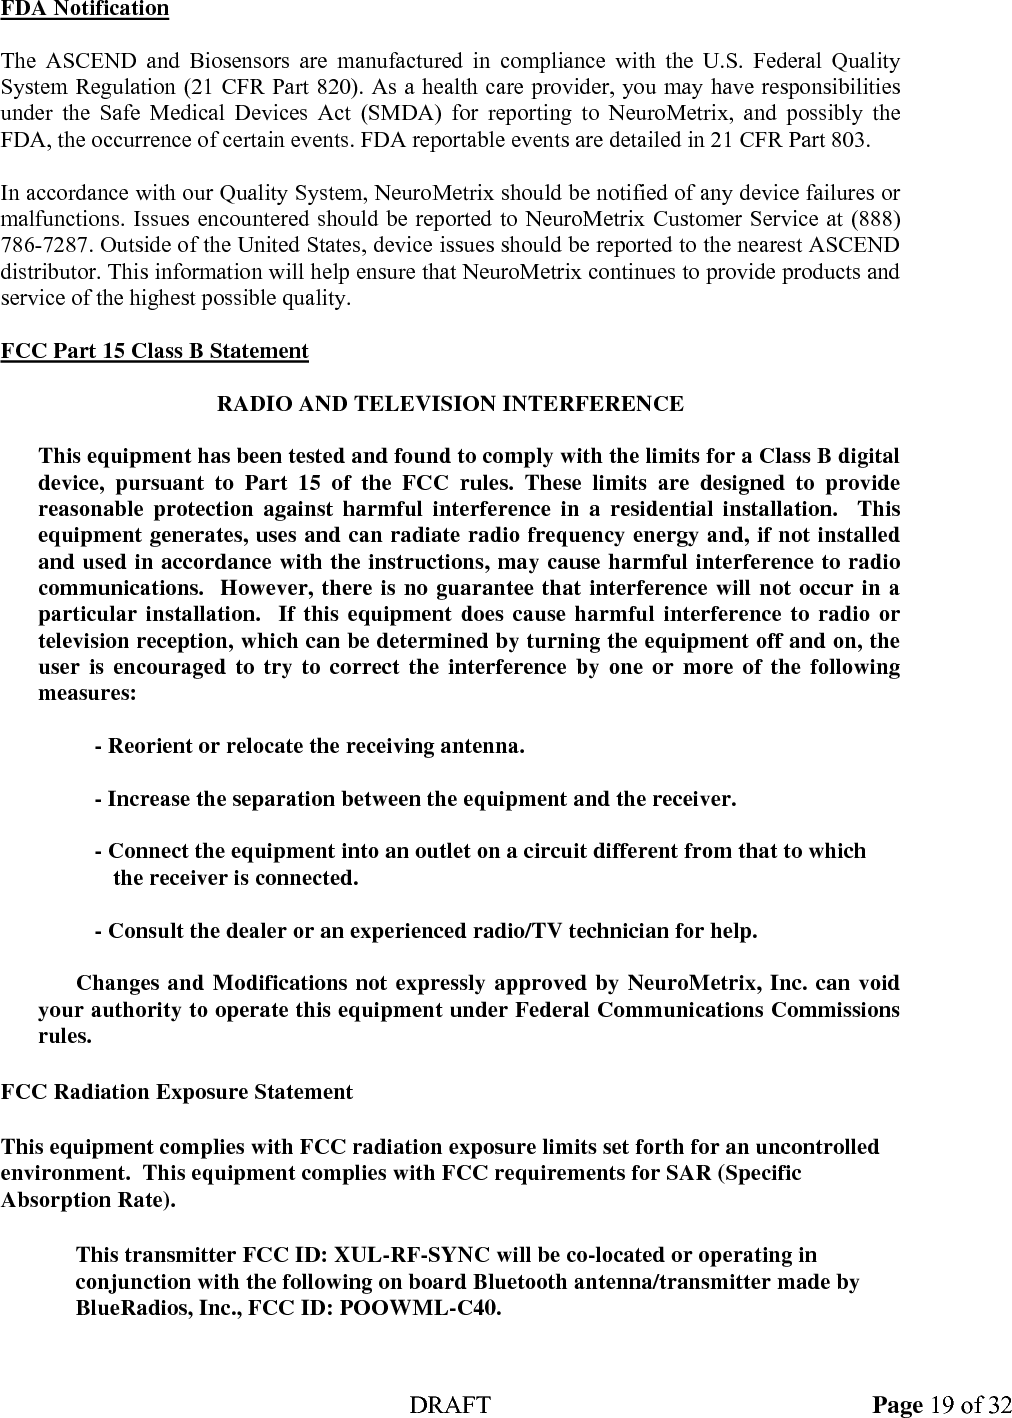  DRAFT Page 19 of 32 FDA Notification  The ASCEND and Biosensors are manufactured in compliance with the U.S. Federal Quality System Regulation (21 CFR Part 820). As a health care provider, you may have responsibilities under the Safe Medical Devices Act (SMDA) for reporting to NeuroMetrix, and possibly the FDA, the occurrence of certain events. FDA reportable events are detailed in 21 CFR Part 803.  In accordance with our Quality System, NeuroMetrix should be notified of any device failures or malfunctions. Issues encountered should be reported to NeuroMetrix Customer Service at (888) 786-7287. Outside of the United States, device issues should be reported to the nearest ASCEND distributor. This information will help ensure that NeuroMetrix continues to provide products and service of the highest possible quality.  FCC Part 15 Class B Statement  RADIO AND TELEVISION INTERFERENCE    This equipment has been tested and found to comply with the limits for a Class B digital device, pursuant to Part 15 of the FCC rules. These limits are designed to provide reasonable protection against harmful interference in a residential installation.  This equipment generates, uses and can radiate radio frequency energy and, if not installed and used in accordance with the instructions, may cause harmful interference to radio communications.  However, there is no guarantee that interference will not occur in a particular installation.  If this equipment does cause harmful interference to radio or television reception, which can be determined by turning the equipment off and on, the user is encouraged to try to correct the interference by one or more of the following measures:  - Reorient or relocate the receiving antenna.  - Increase the separation between the equipment and the receiver.  - Connect the equipment into an outlet on a circuit different from that to which the receiver is connected.  - Consult the dealer or an experienced radio/TV technician for help.    Changes and Modifications not expressly approved by NeuroMetrix, Inc. can void your authority to operate this equipment under Federal Communications Commissions rules. FCC Radiation Exposure Statement This equipment complies with FCC radiation exposure limits set forth for an uncontrolled environment.  This equipment complies with FCC requirements for SAR (Specific Absorption Rate).  This transmitter FCC ID: XUL-RF-SYNC will be co-located or operating in conjunction with the following on board Bluetooth antenna/transmitter made by BlueRadios, Inc., FCC ID: POOWML-C40. 